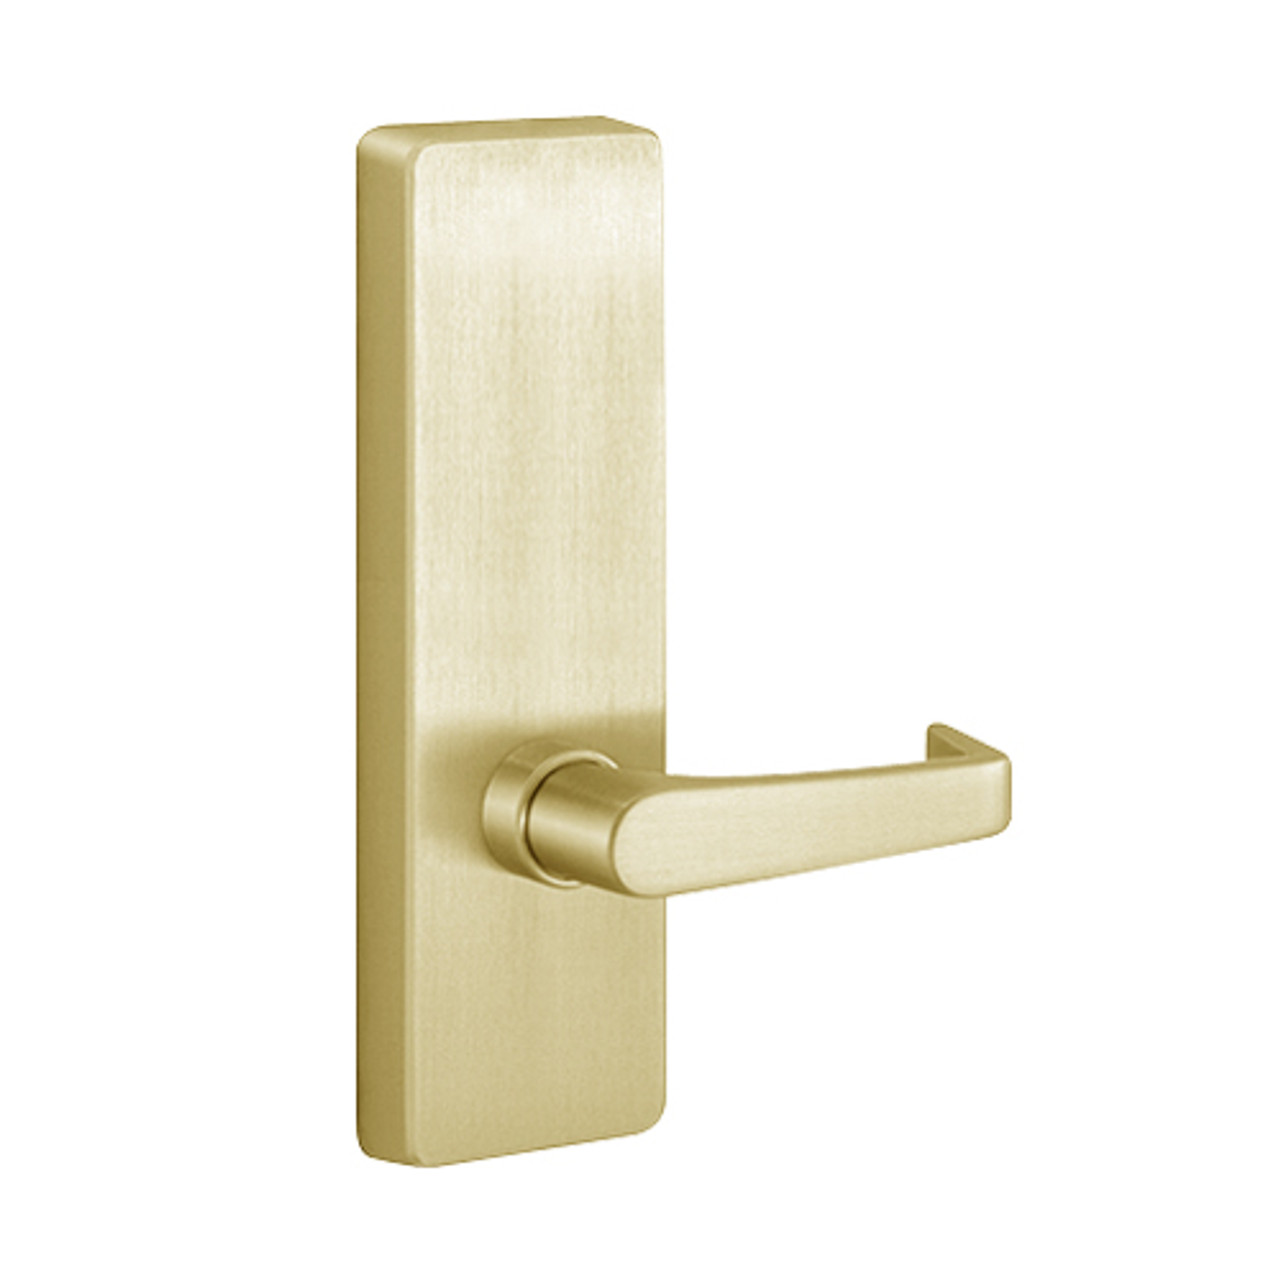 R4902A-605-LHR PHI Dummy Trim with A Lever Design for Apex and Olympian Series Exit Device in Bright Brass Finish